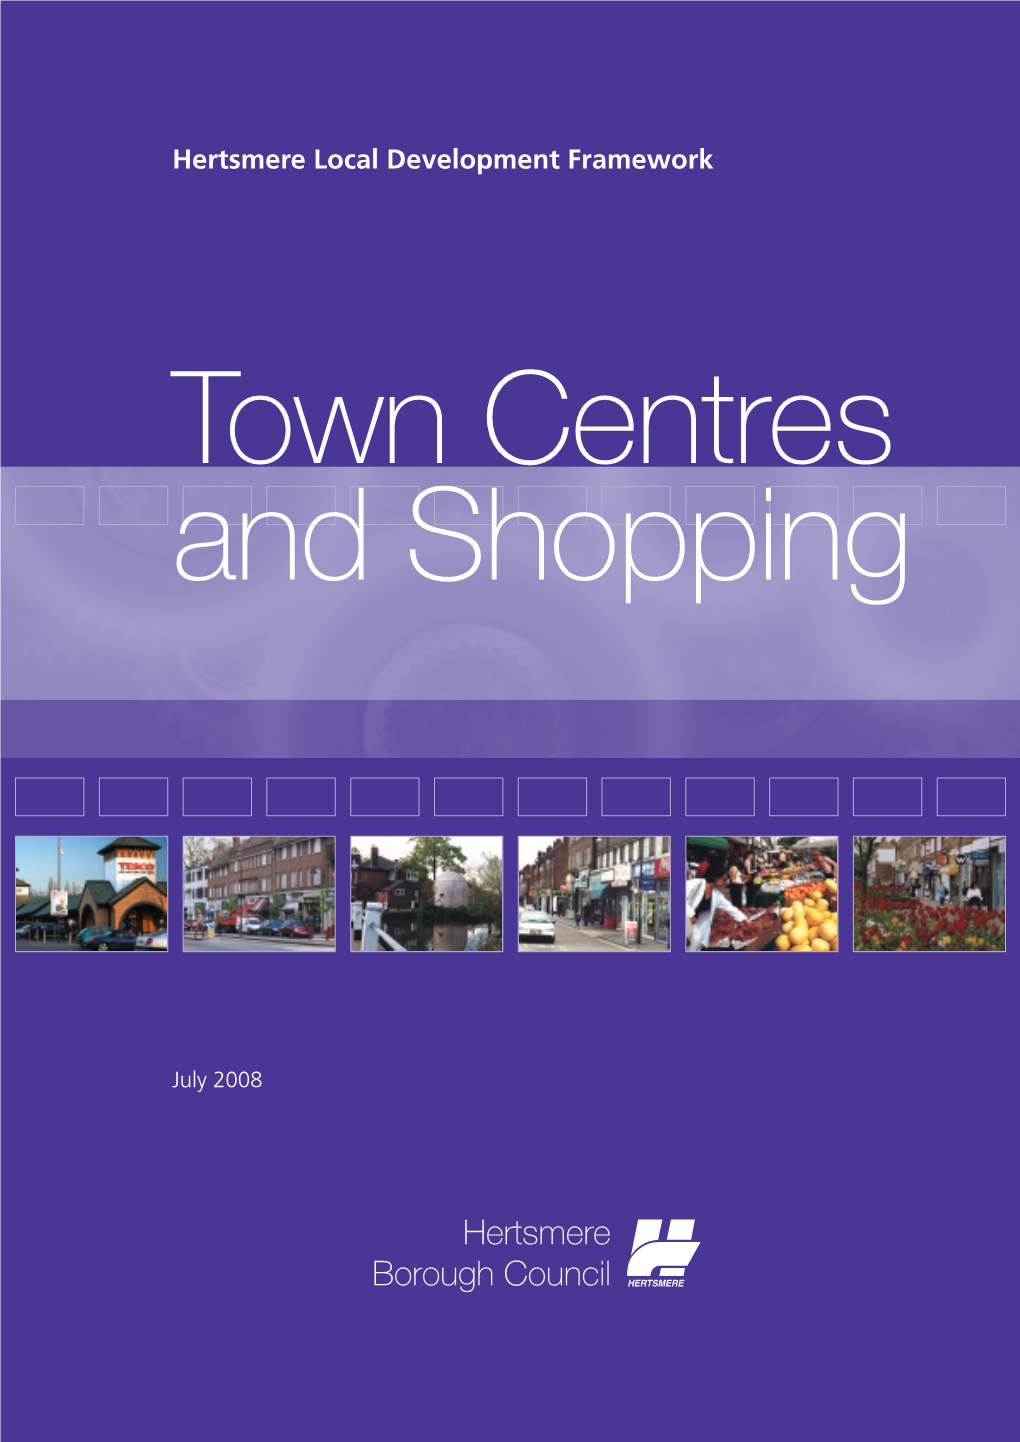 And Shopping Town Centres